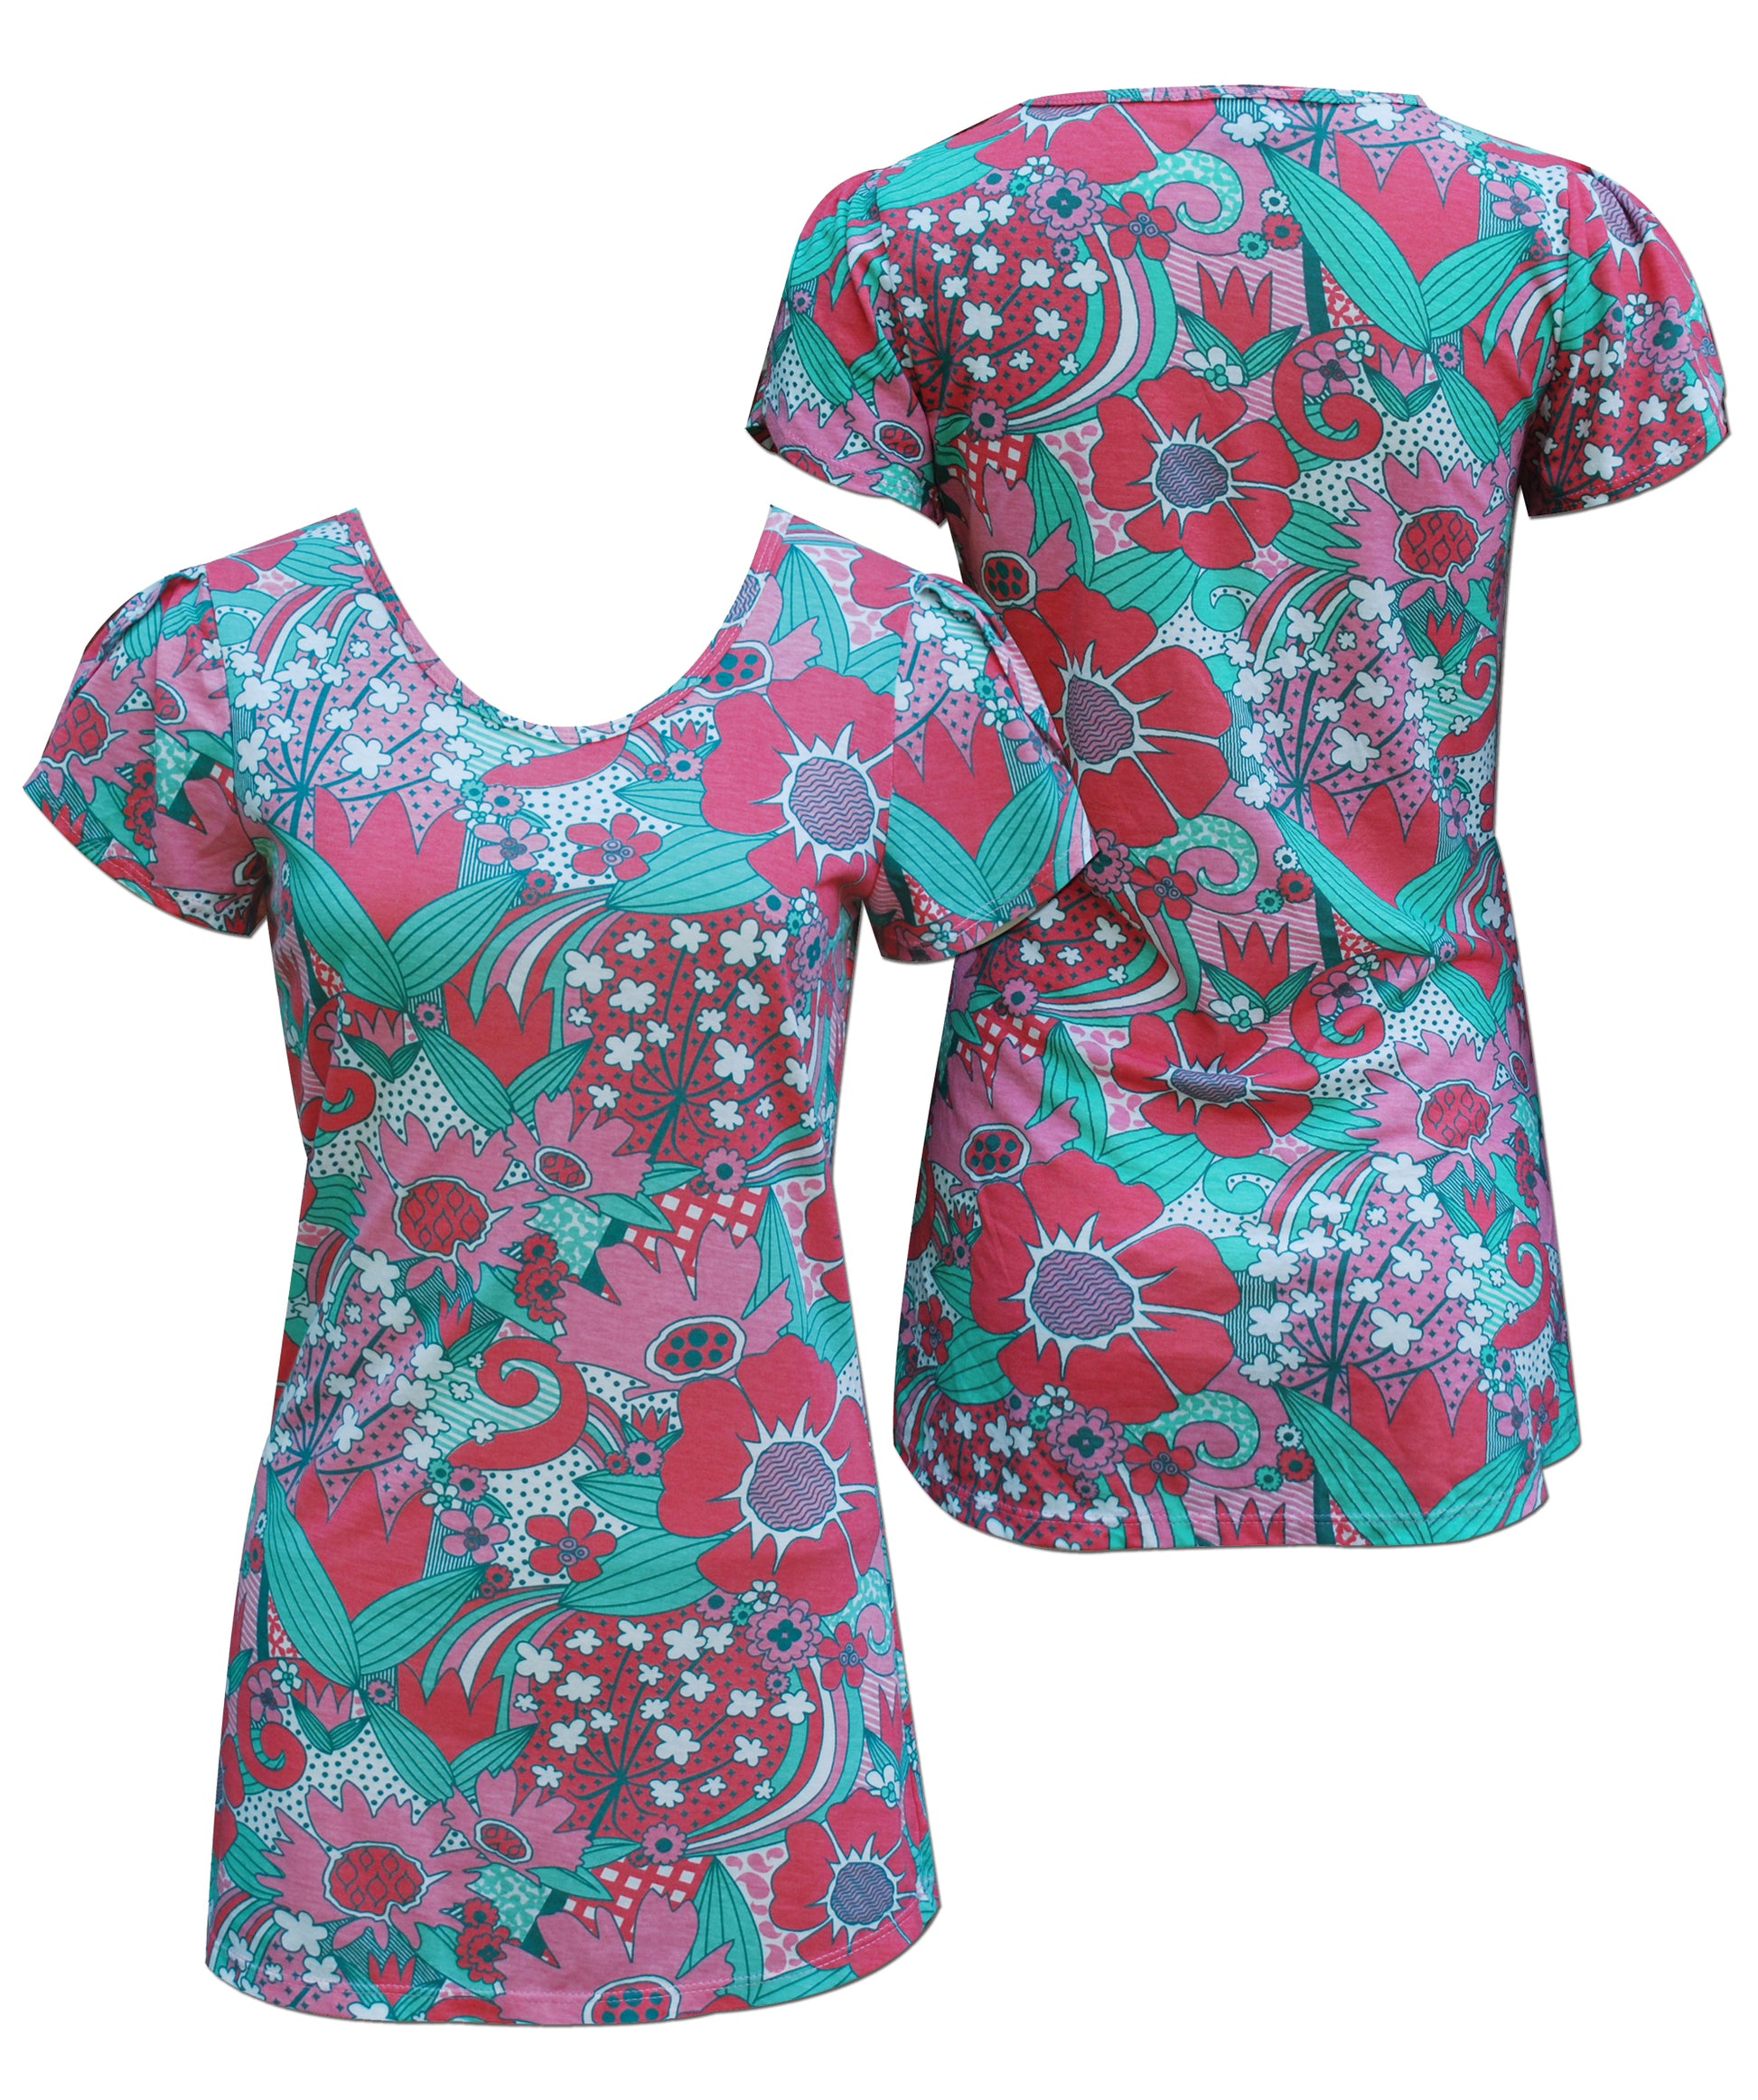 Front and back view of tulip-sleeved pink and green floral tee